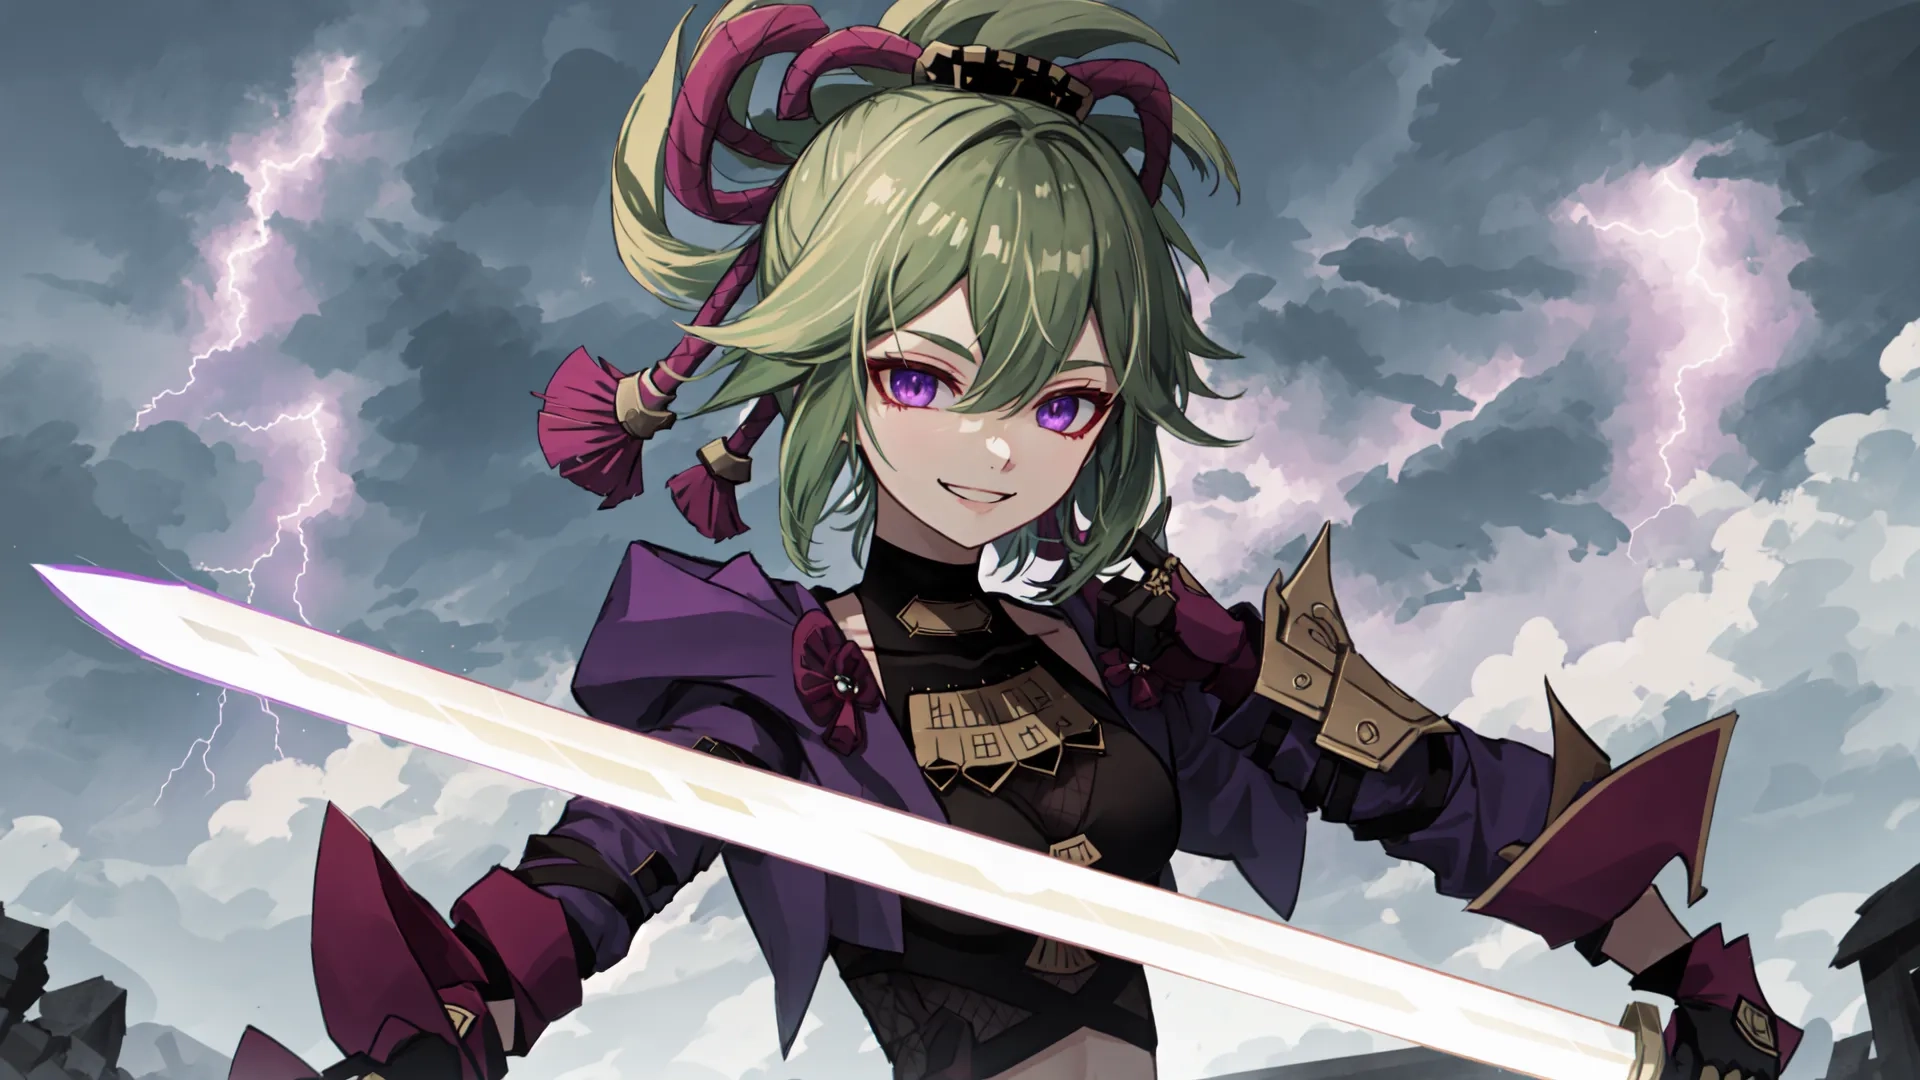 the girl has long hair and pink sunglasses holding her swords in front of a gray cloudy sky with lightning above her face on an island
